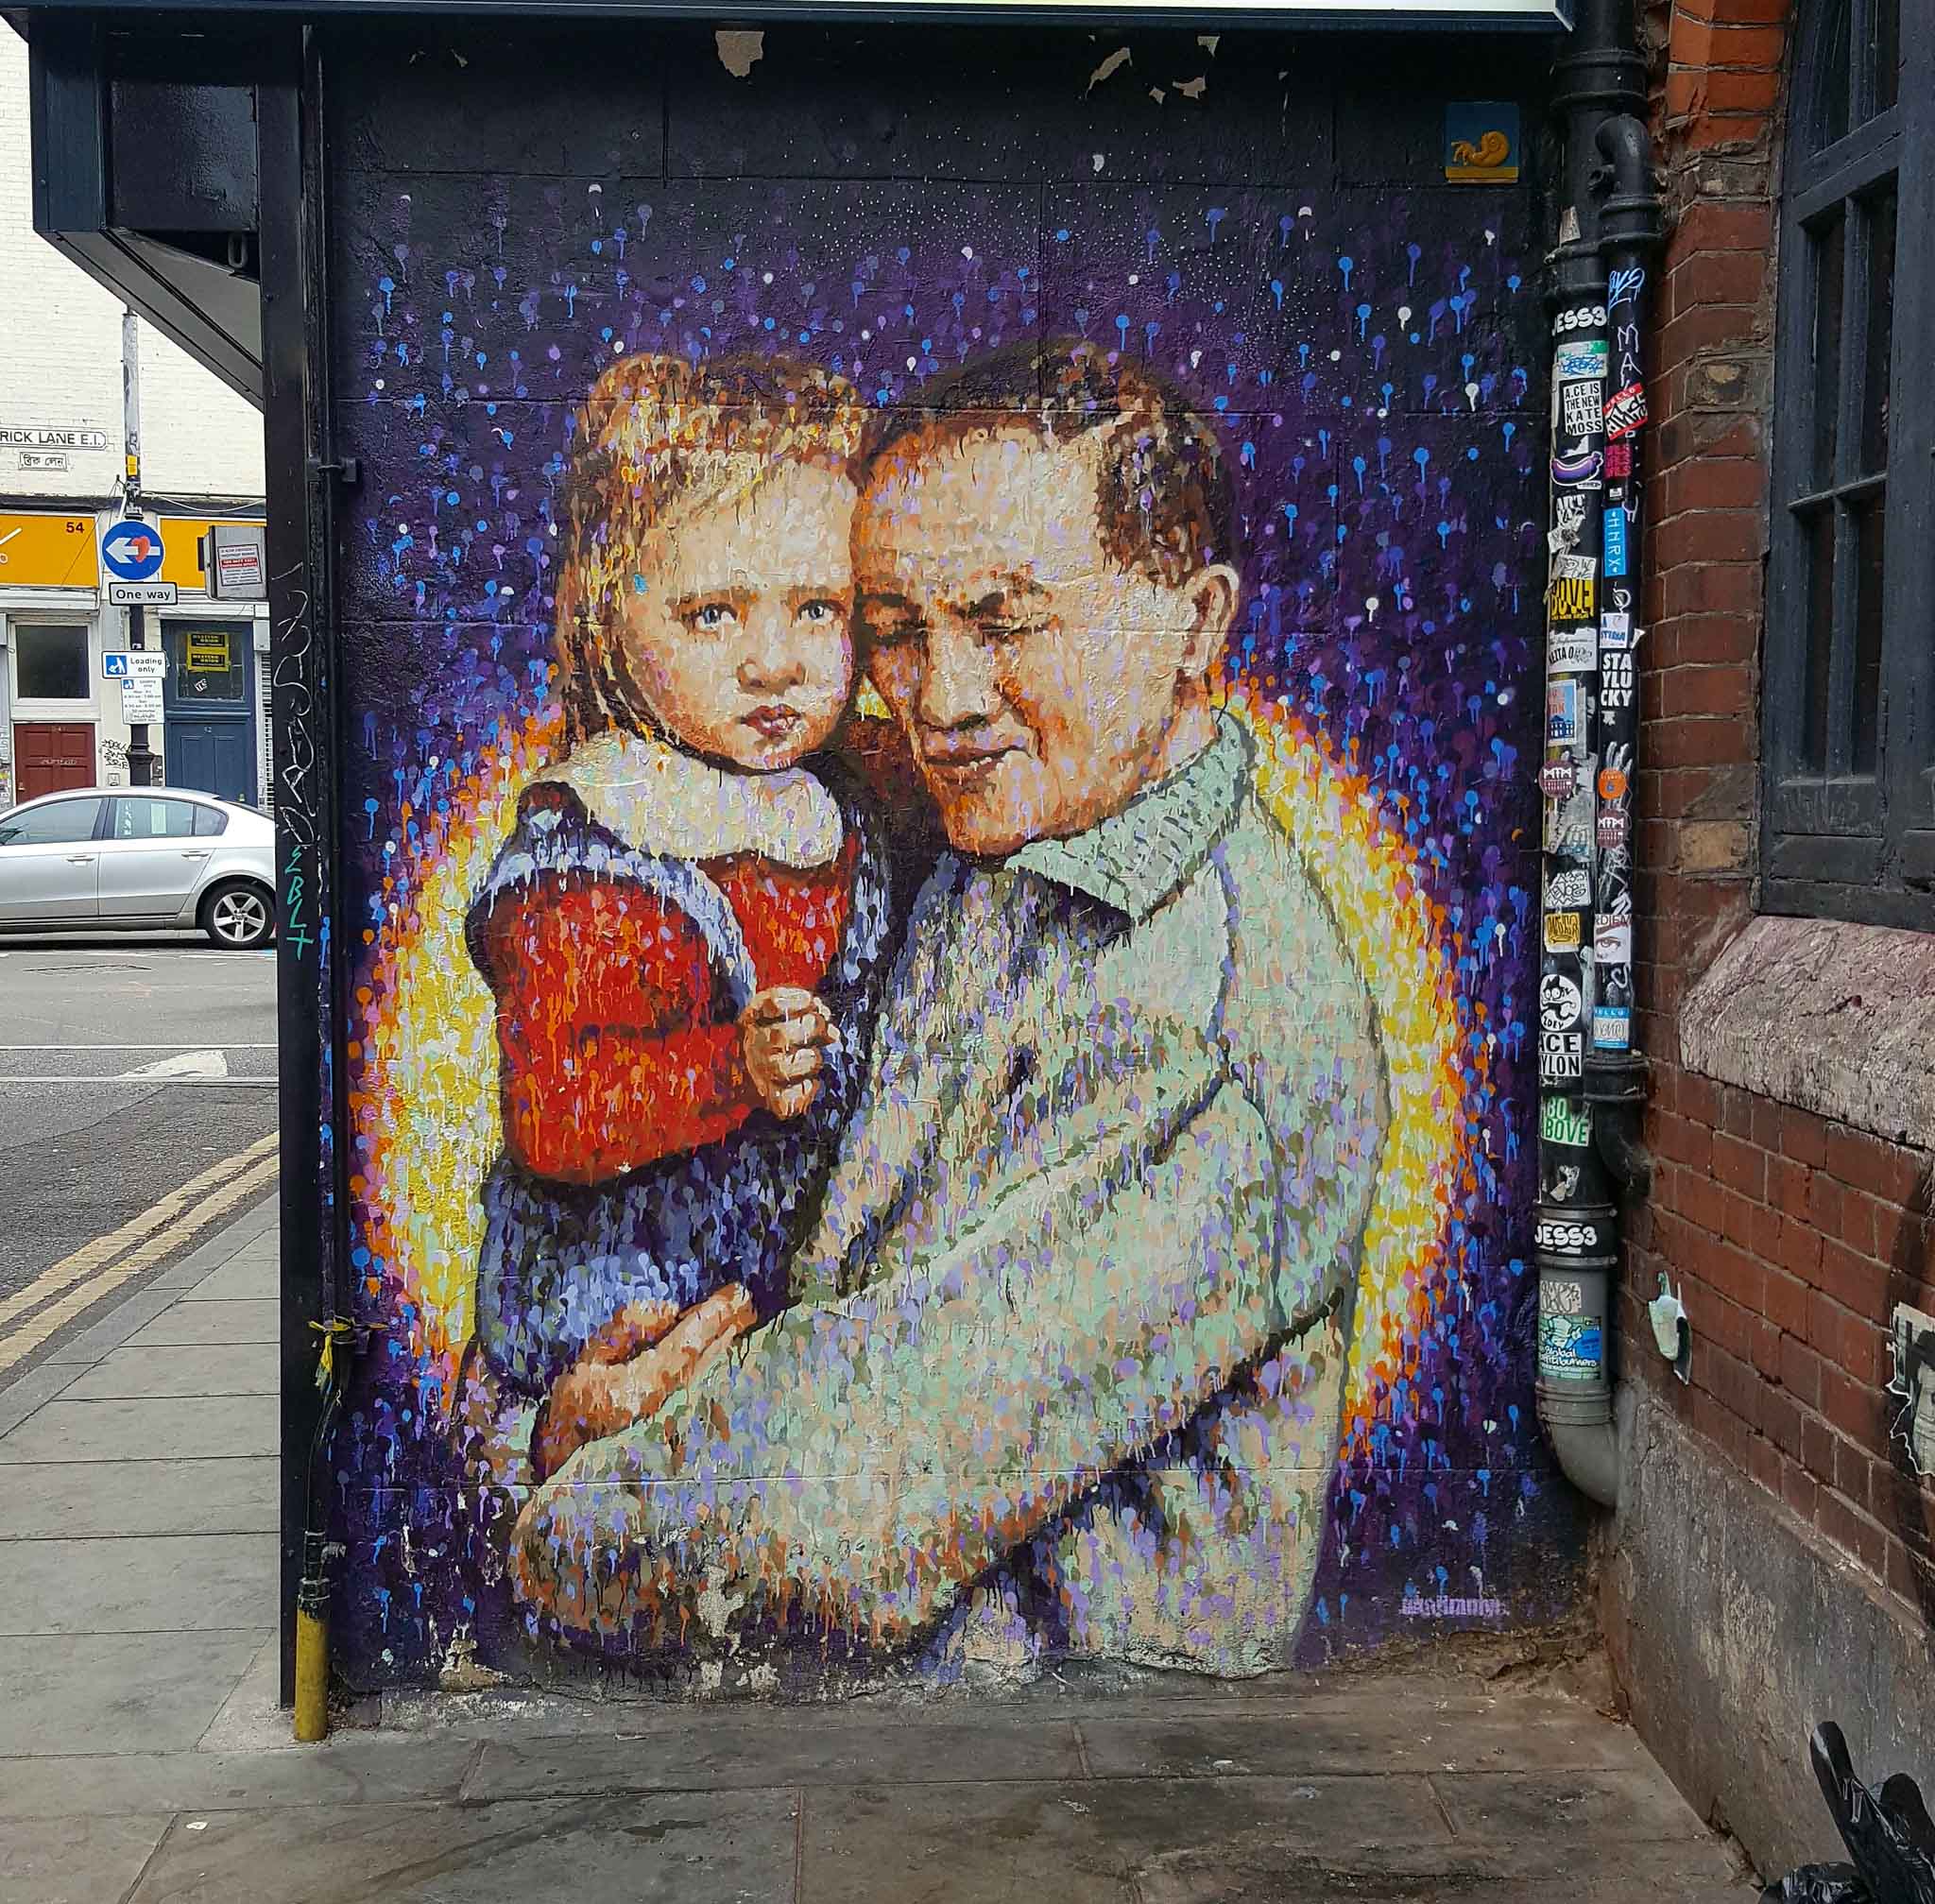 A man holding a small girl in his arms. Street Art by Jimmy C